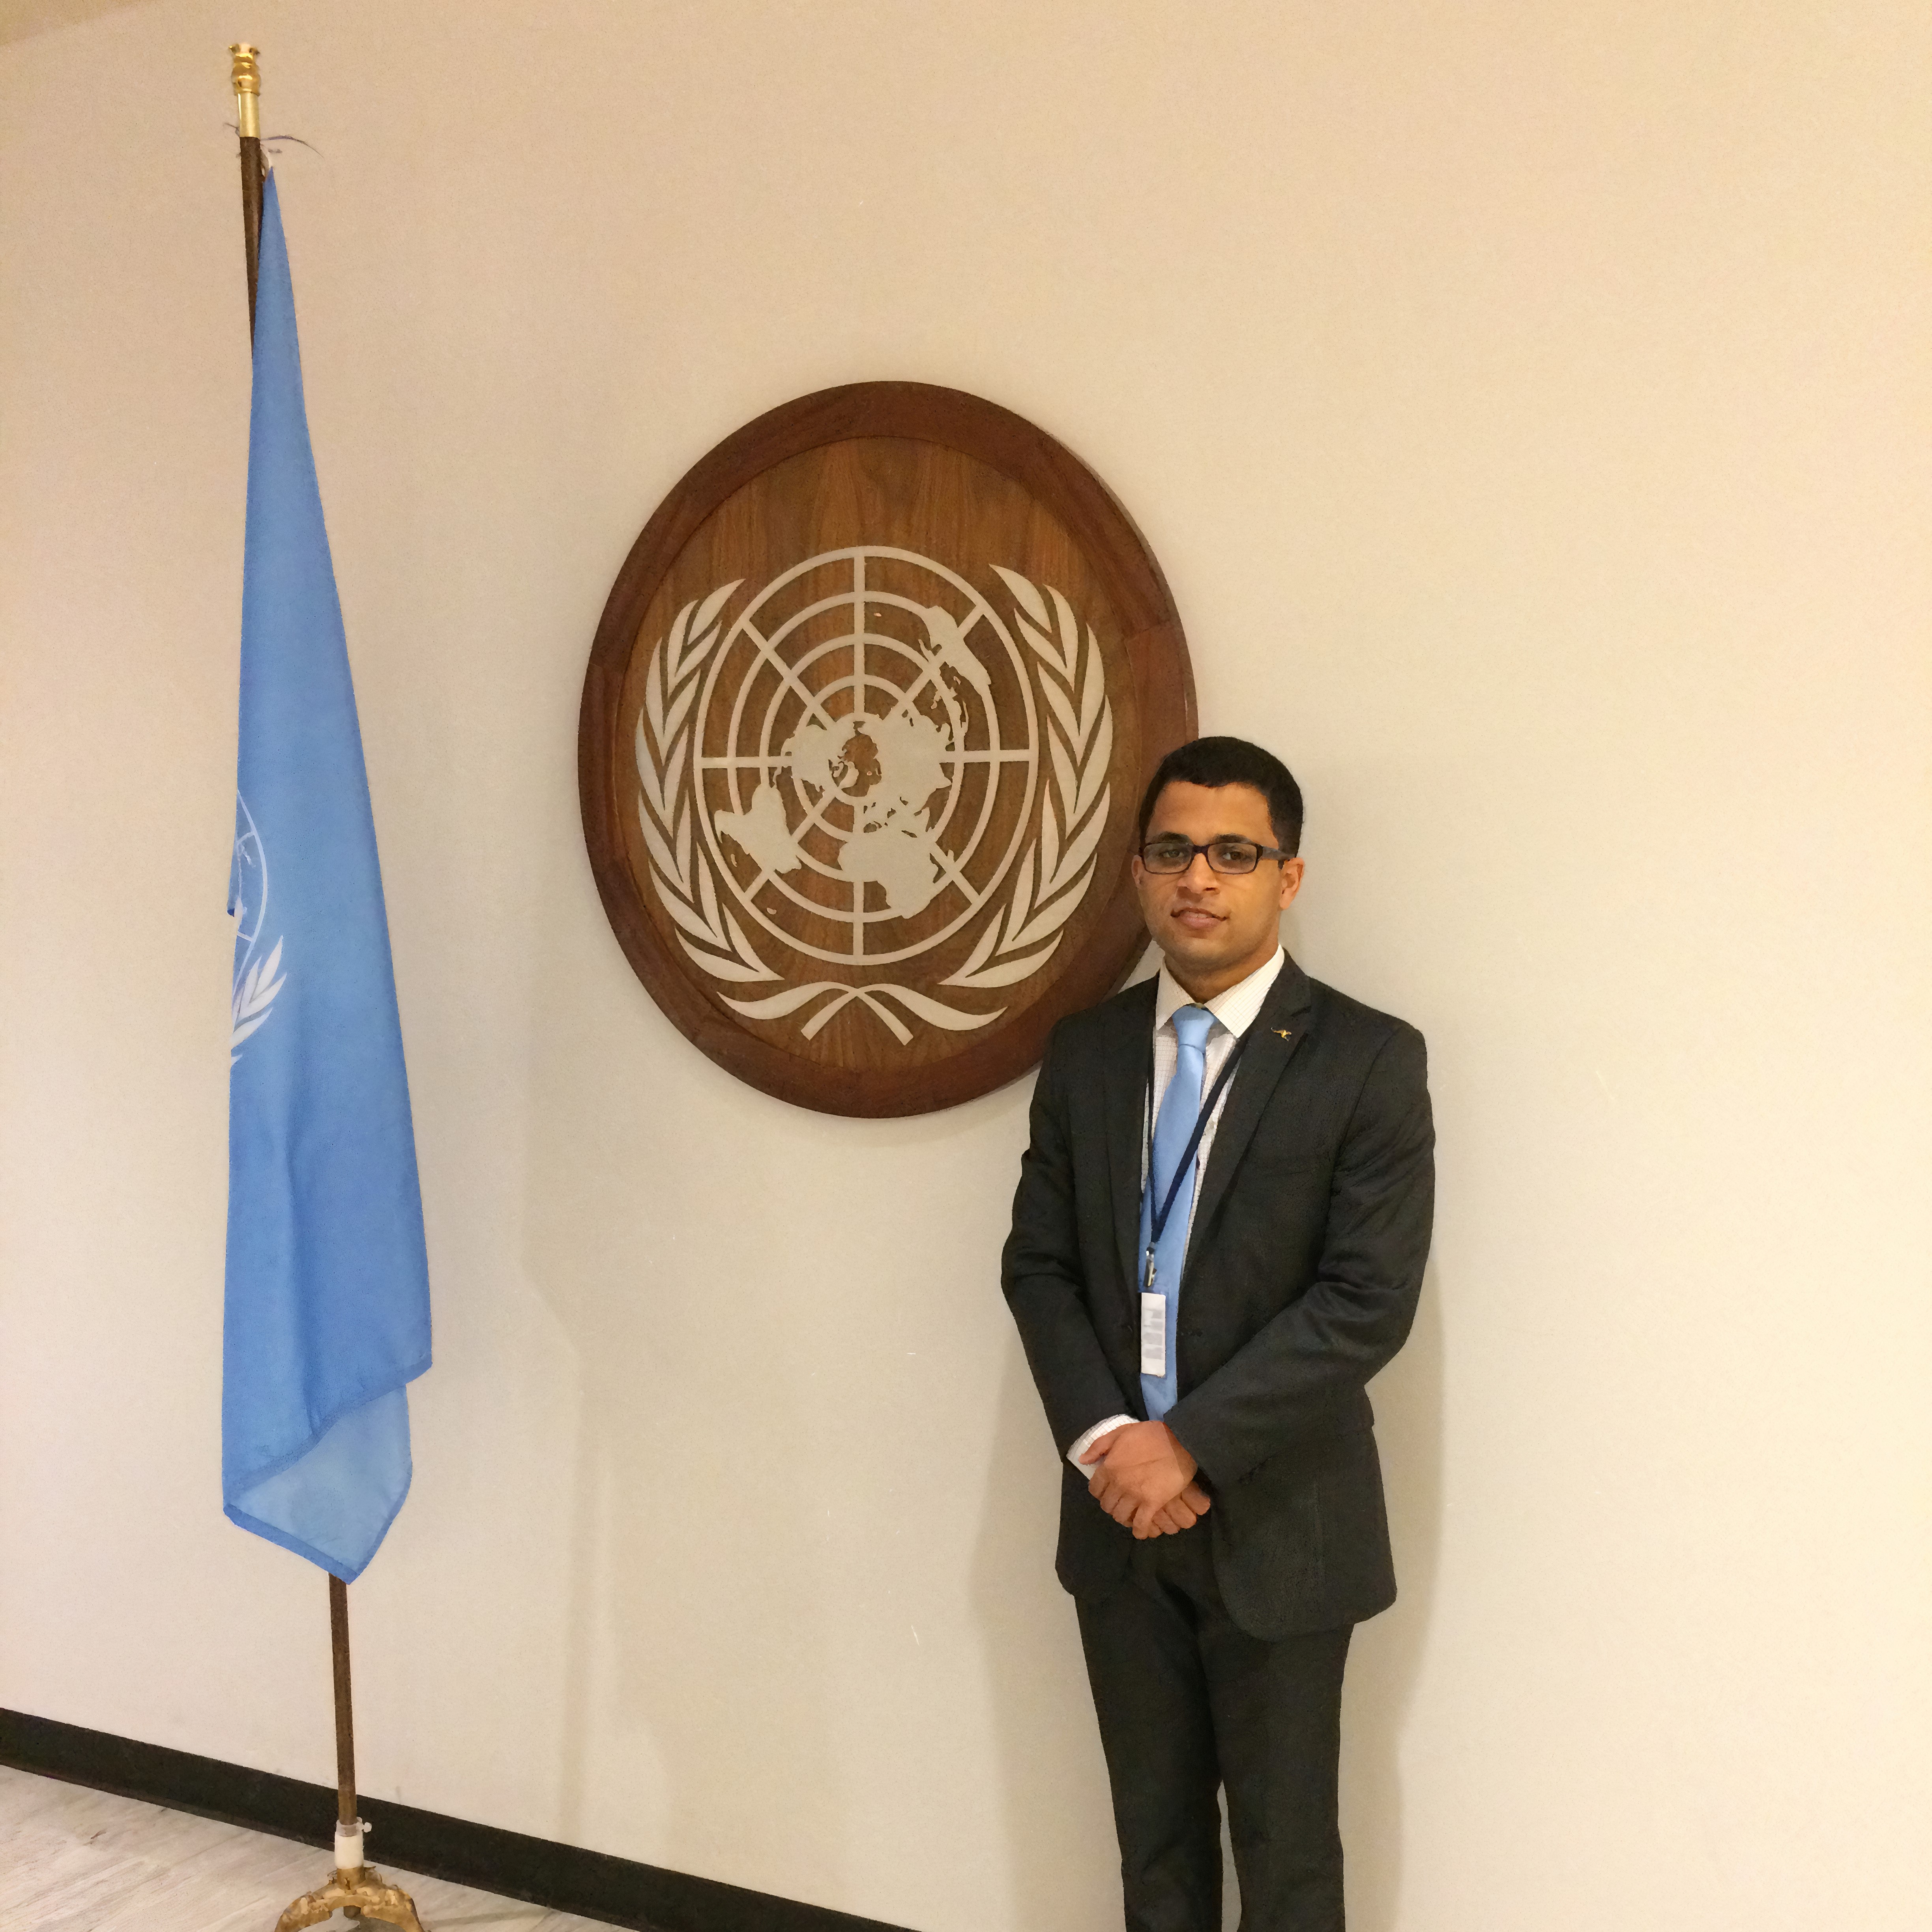 At the UN Headquarters in New York